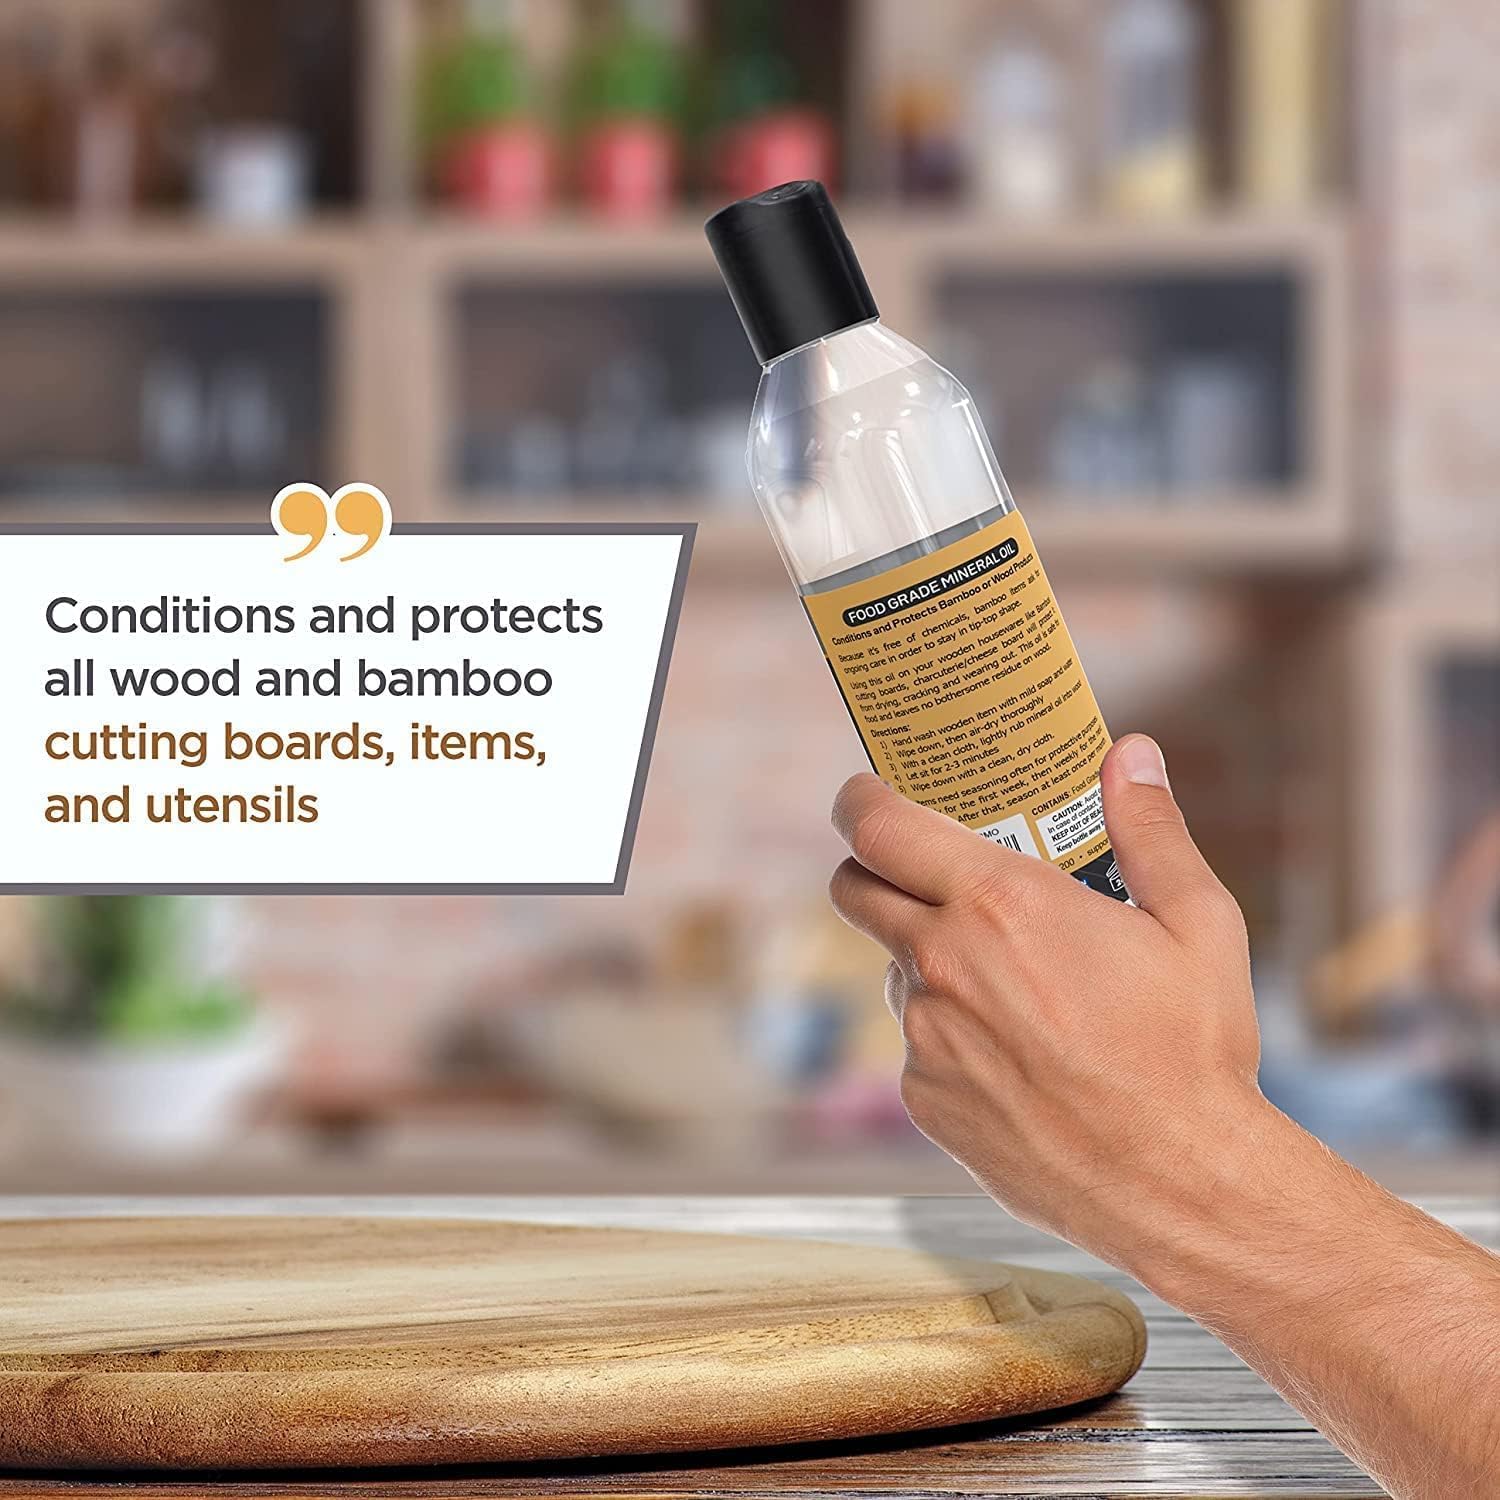 Food Grade Mineral Oil - 16 oz Cutting Board Oil - Butcher Block Oil to Maintain Wood Cutting Board Conditioner, Protects and Restores Wood, Bamboo, and Teak Cutting Boards and Utensils. by: Bambüsi : Health & Household